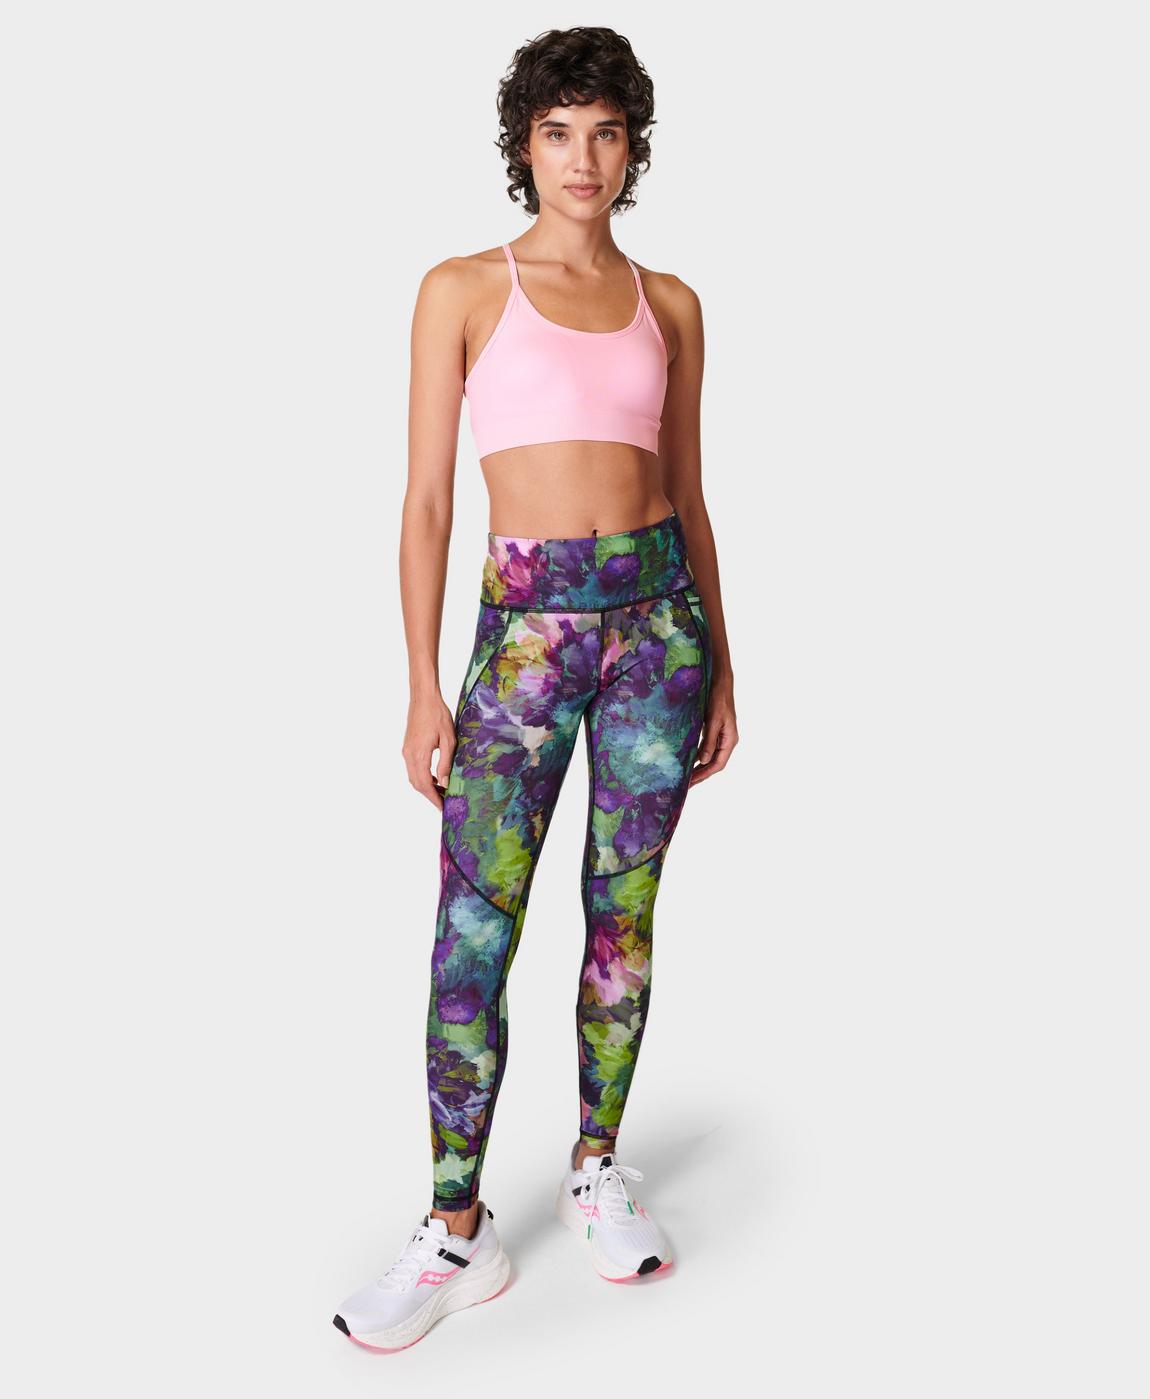 Power Workout Leggings - Green Luxe Floral Print